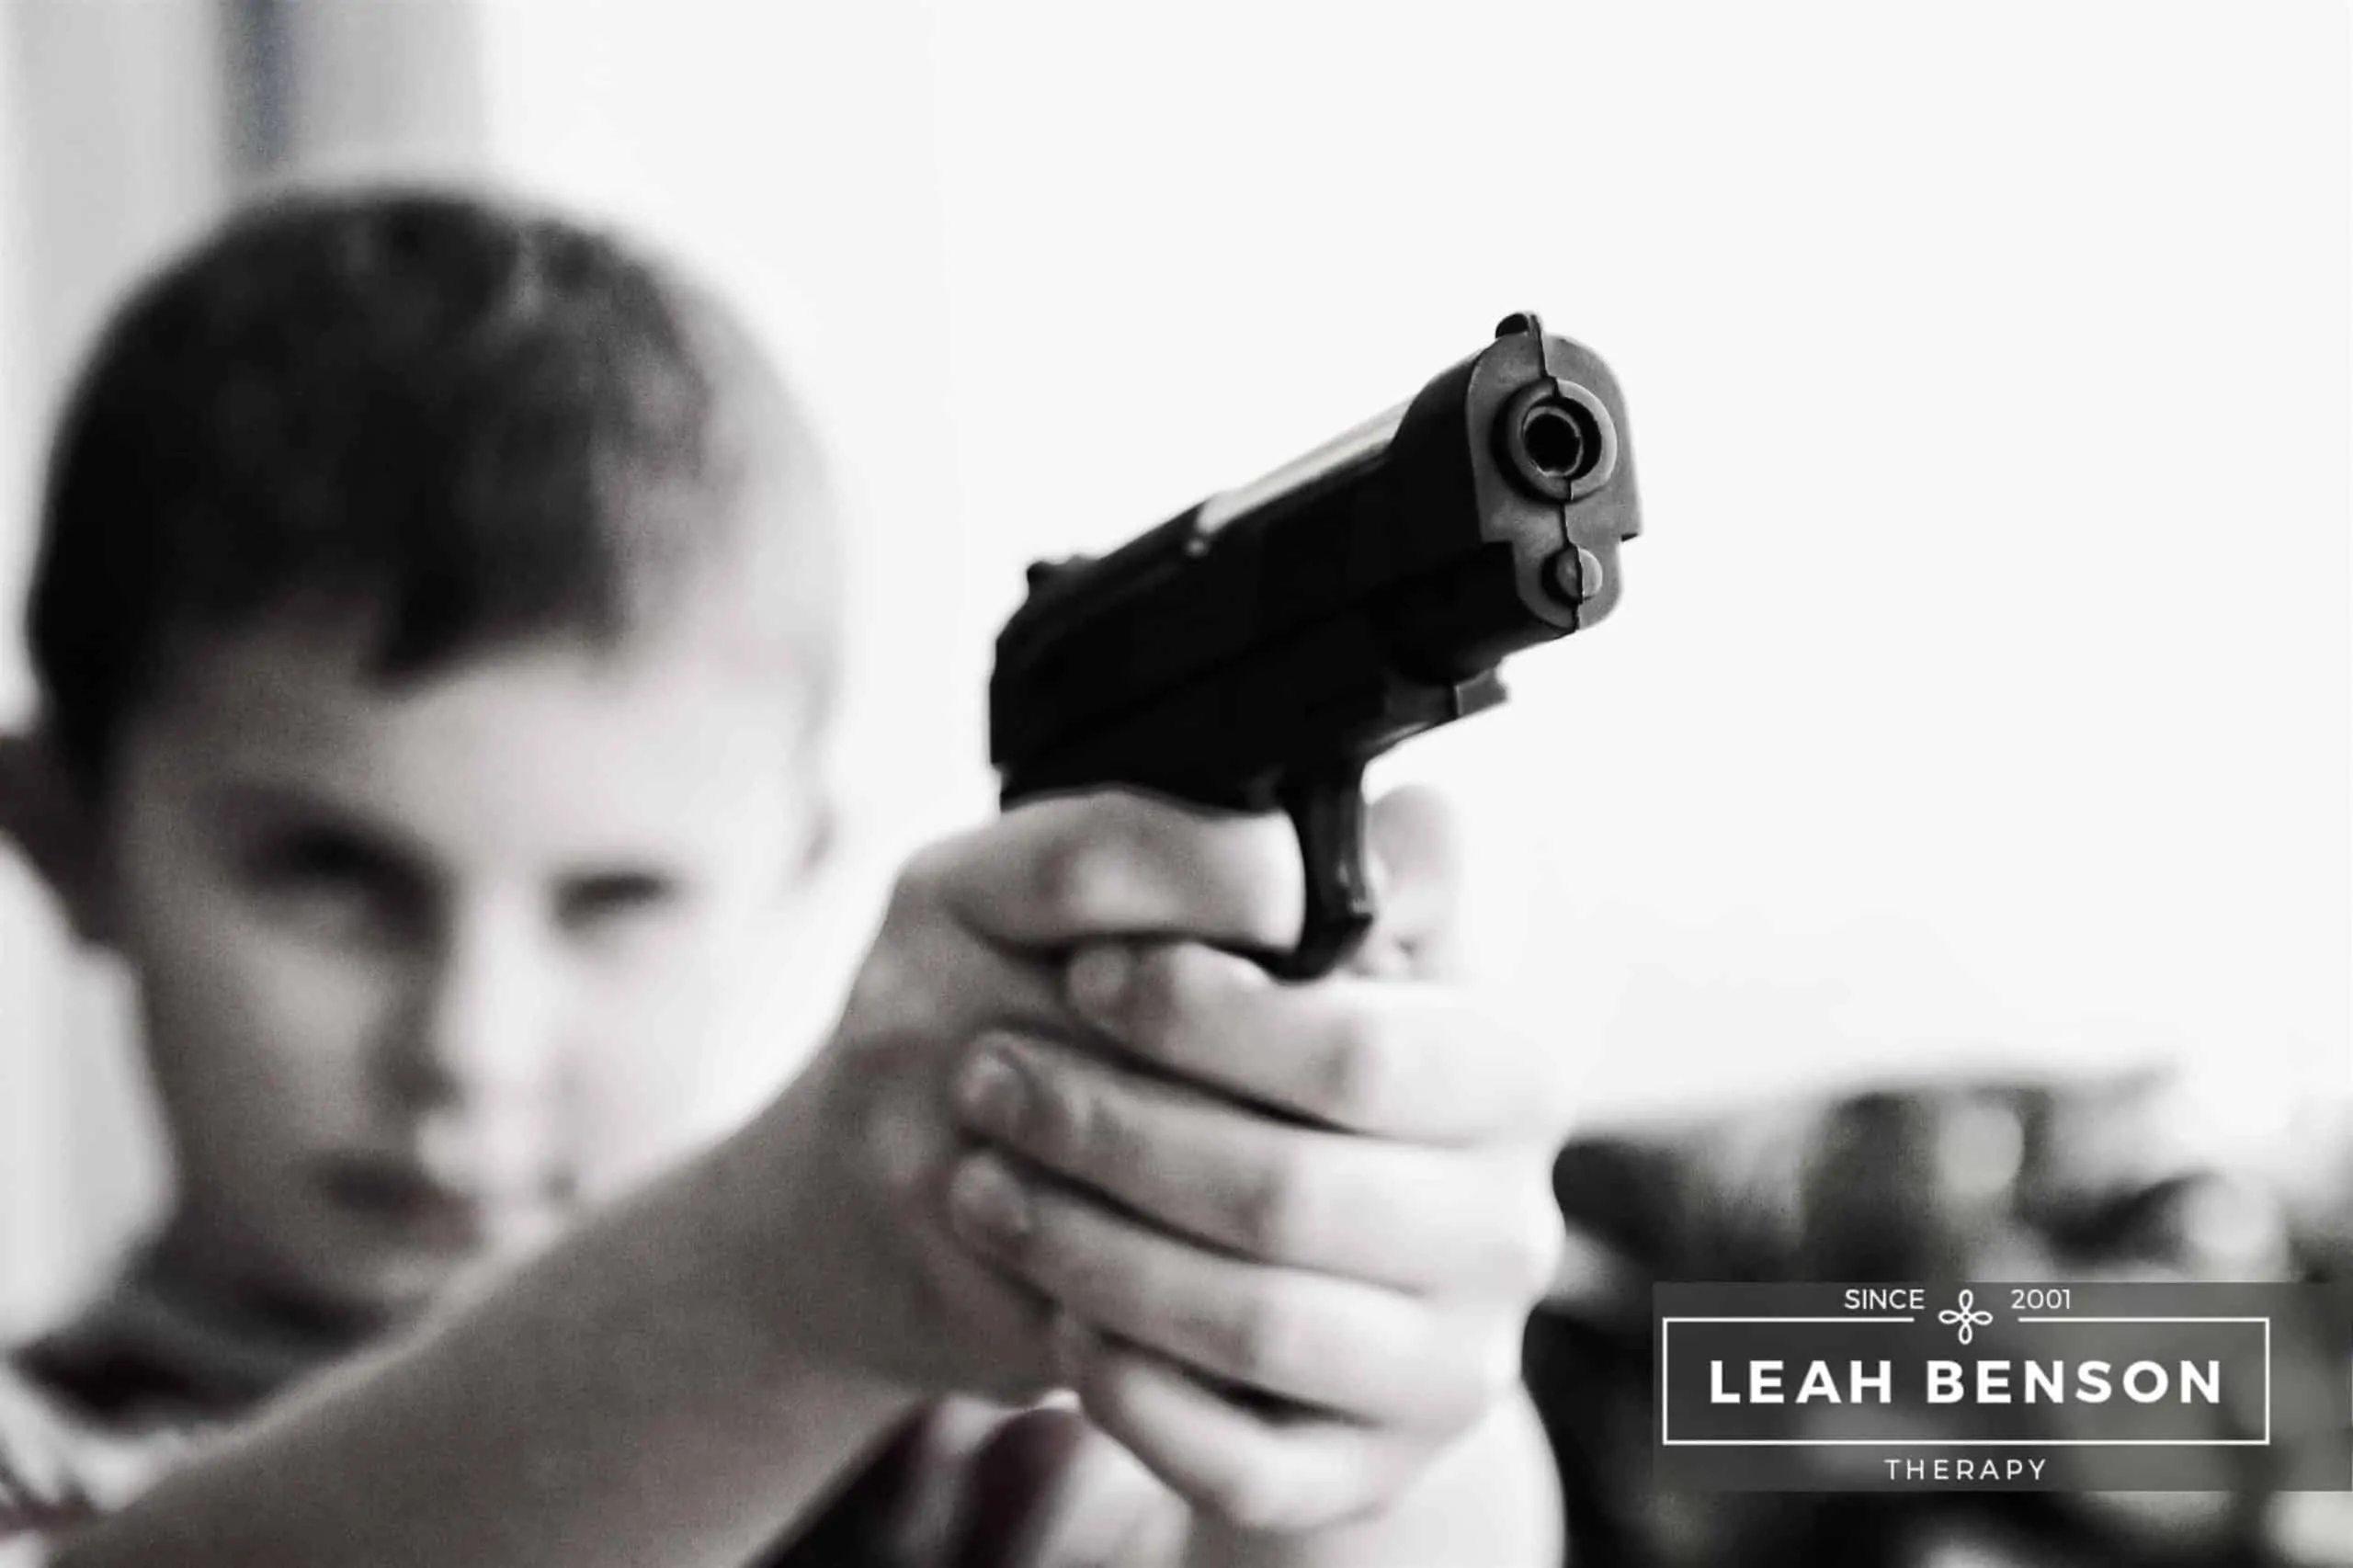 Young boy pointing a toy pistol near the camera. Text says LEAH BENSON THERAPY